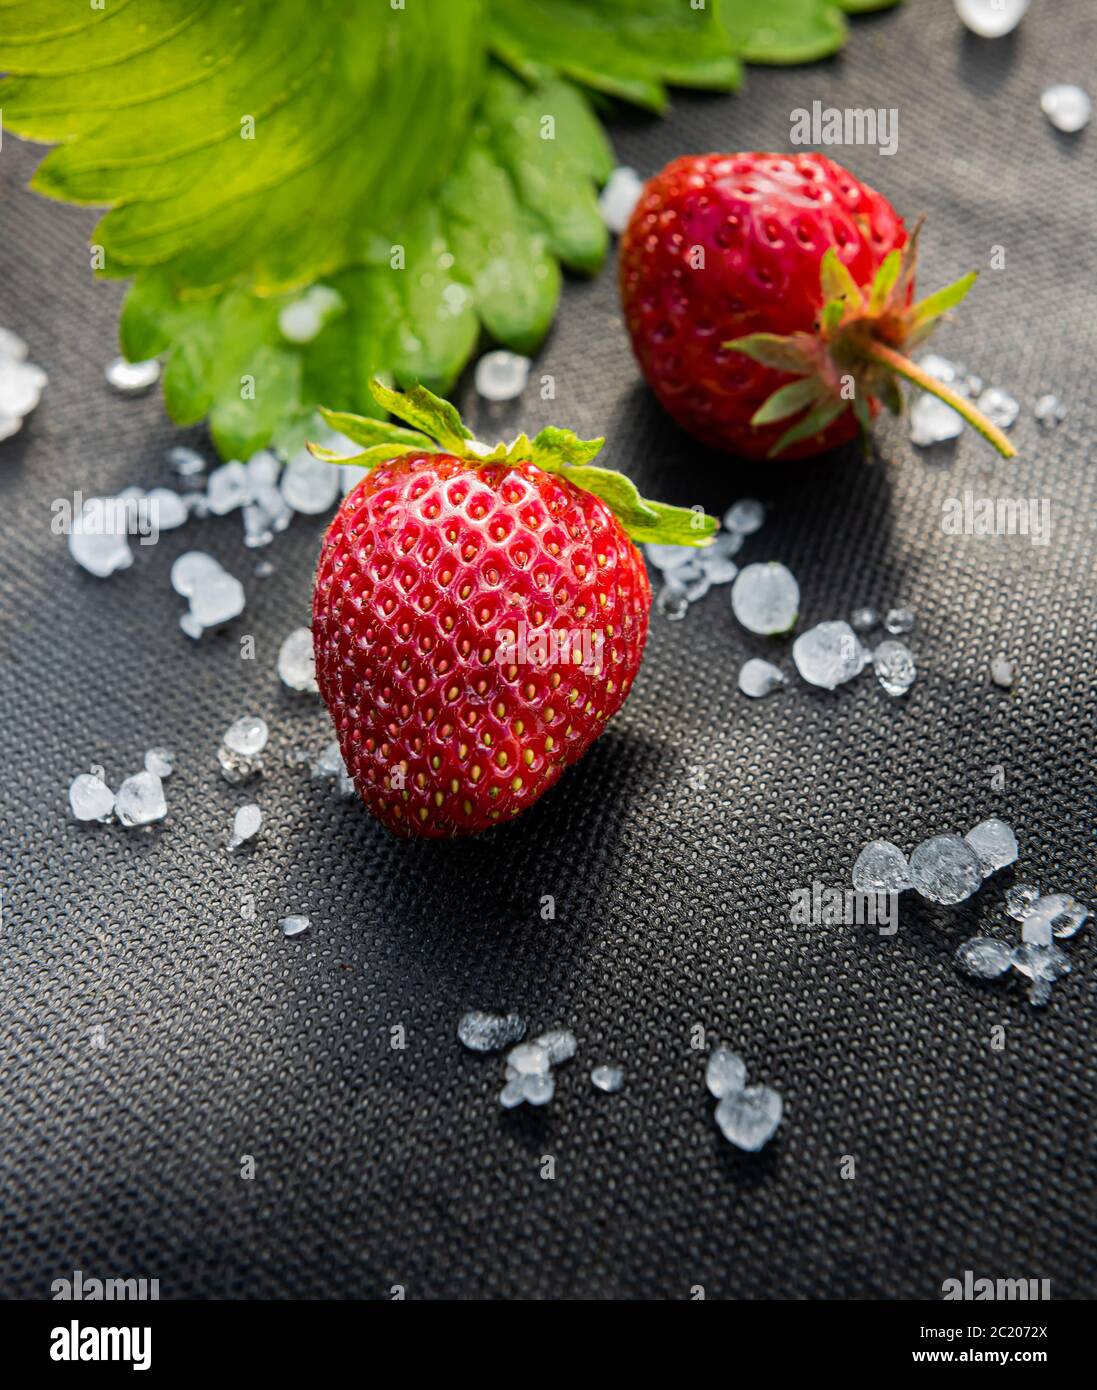 Red strawberries with few white hailstones and strawberry leaf on black material used for cultivating this berry in garden. Vertical background with c Stock Photo